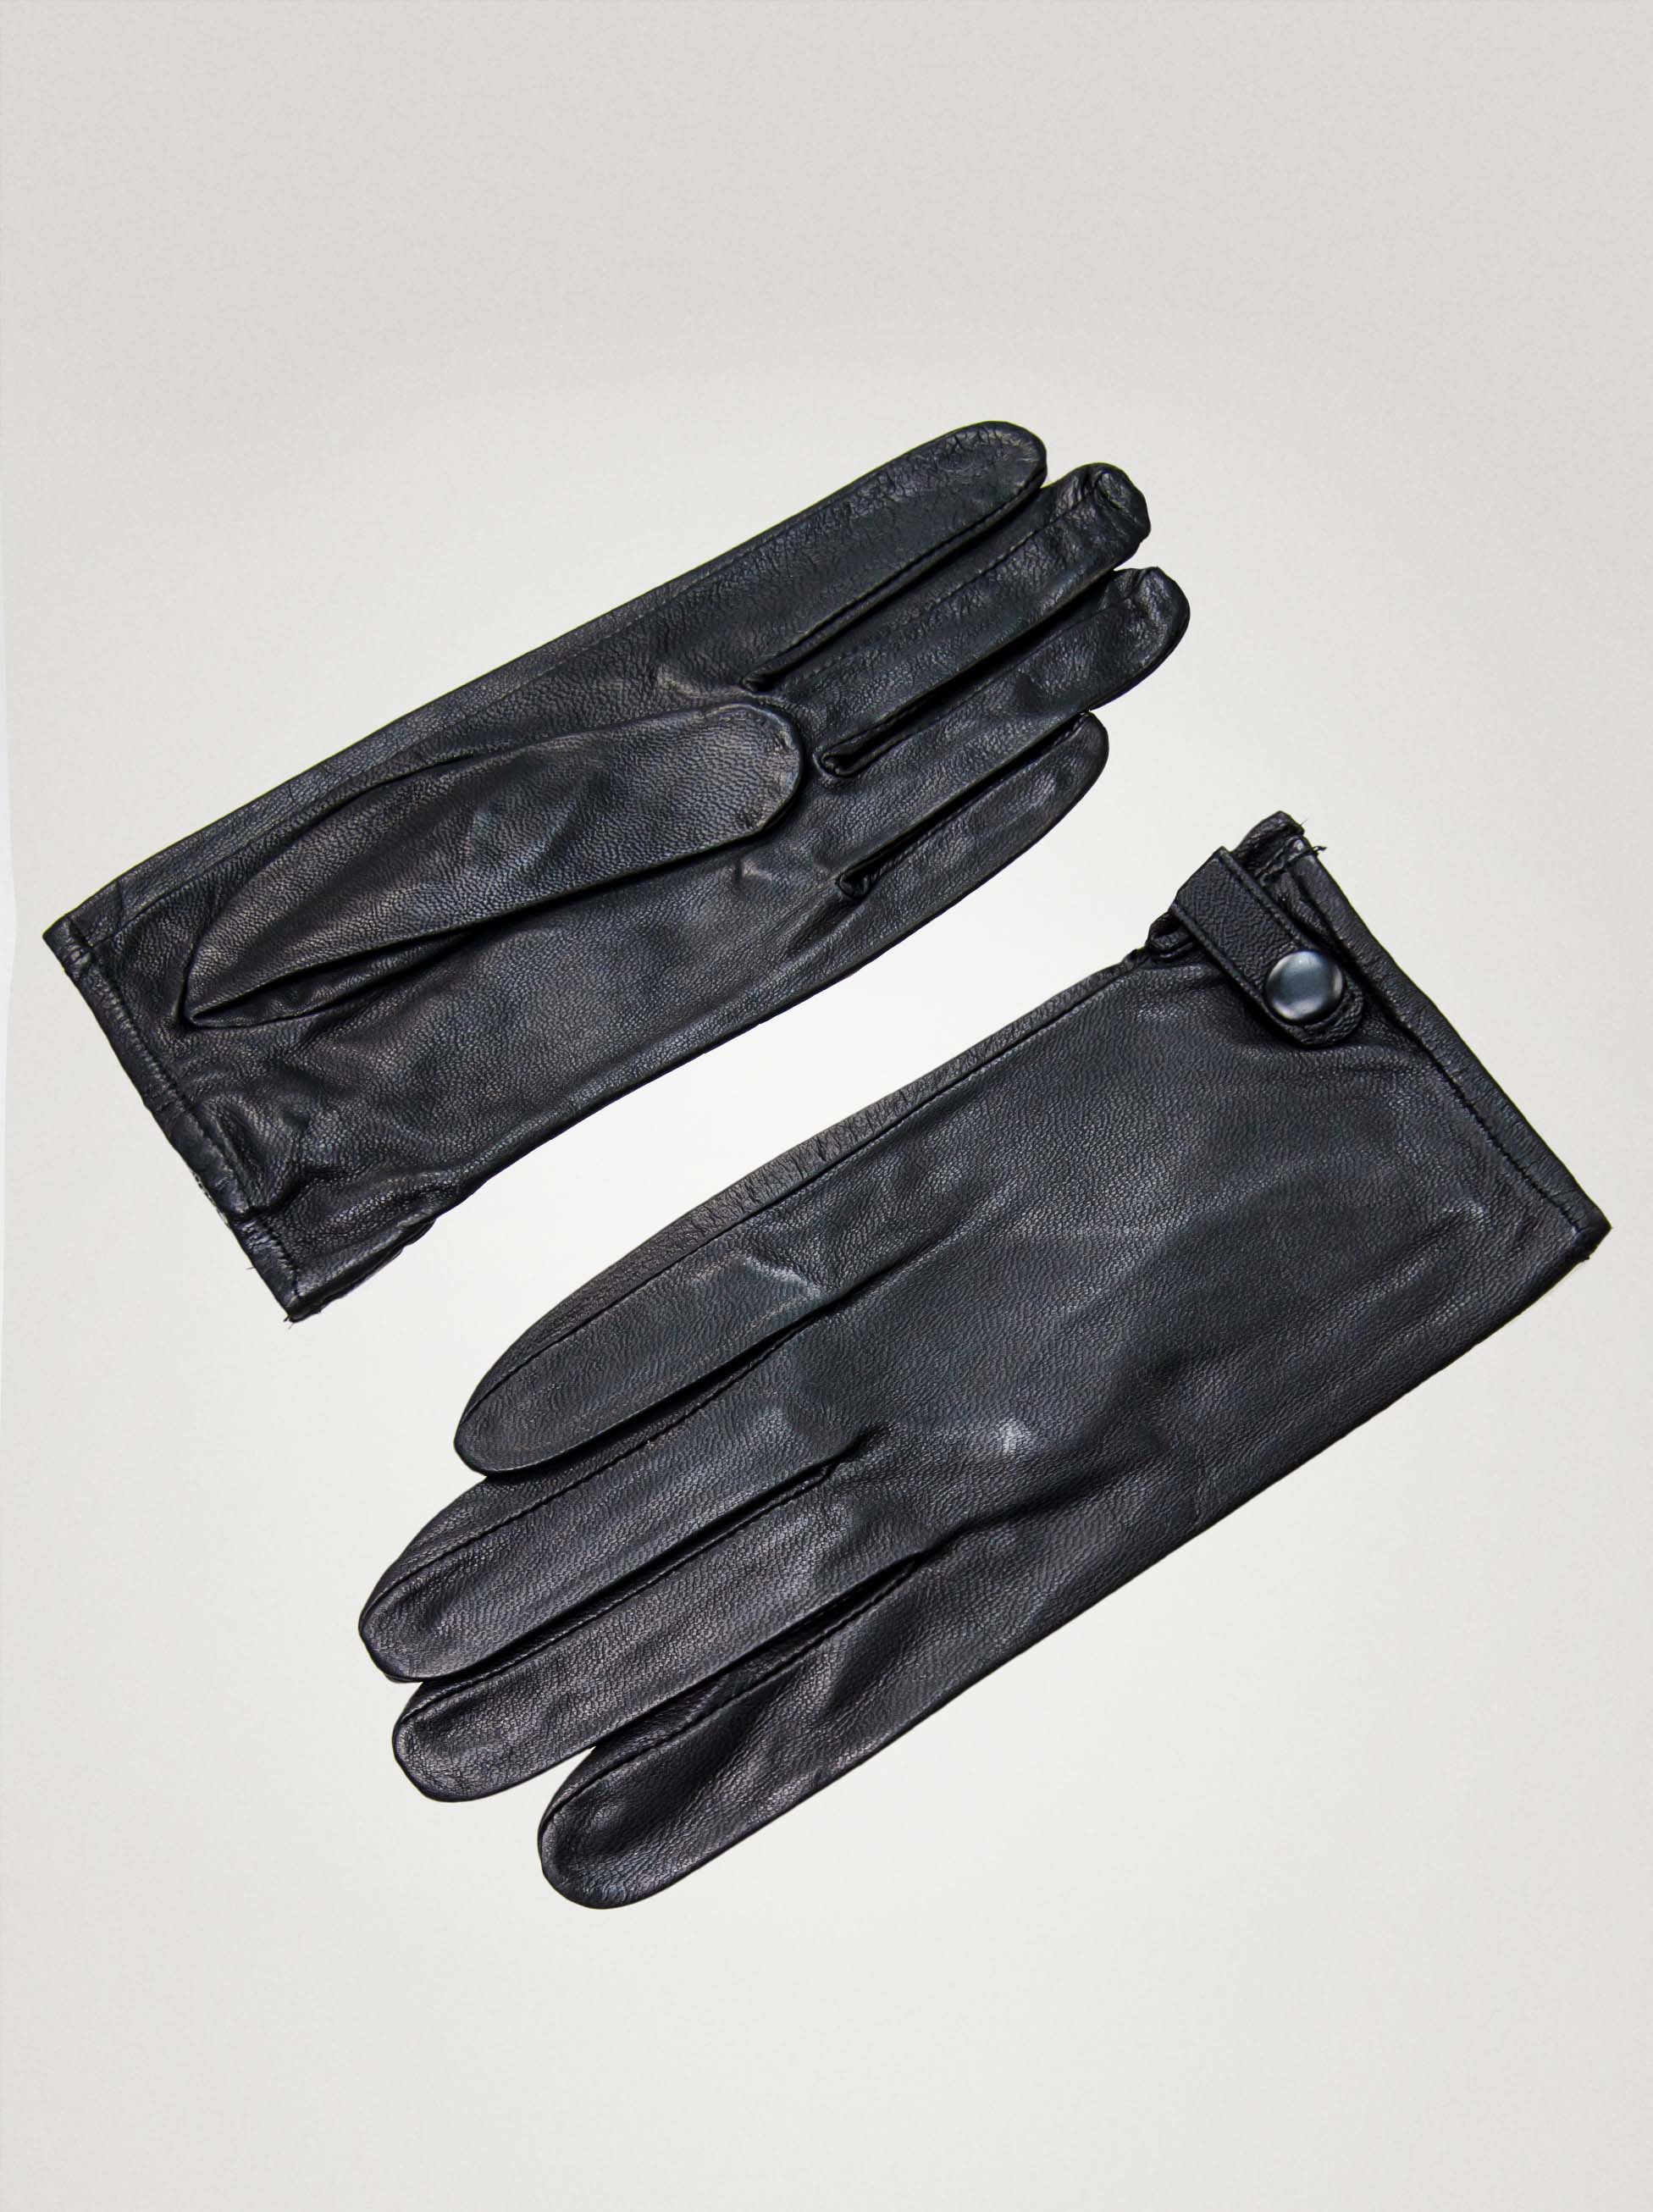 Leather gloves l - Allora image 2